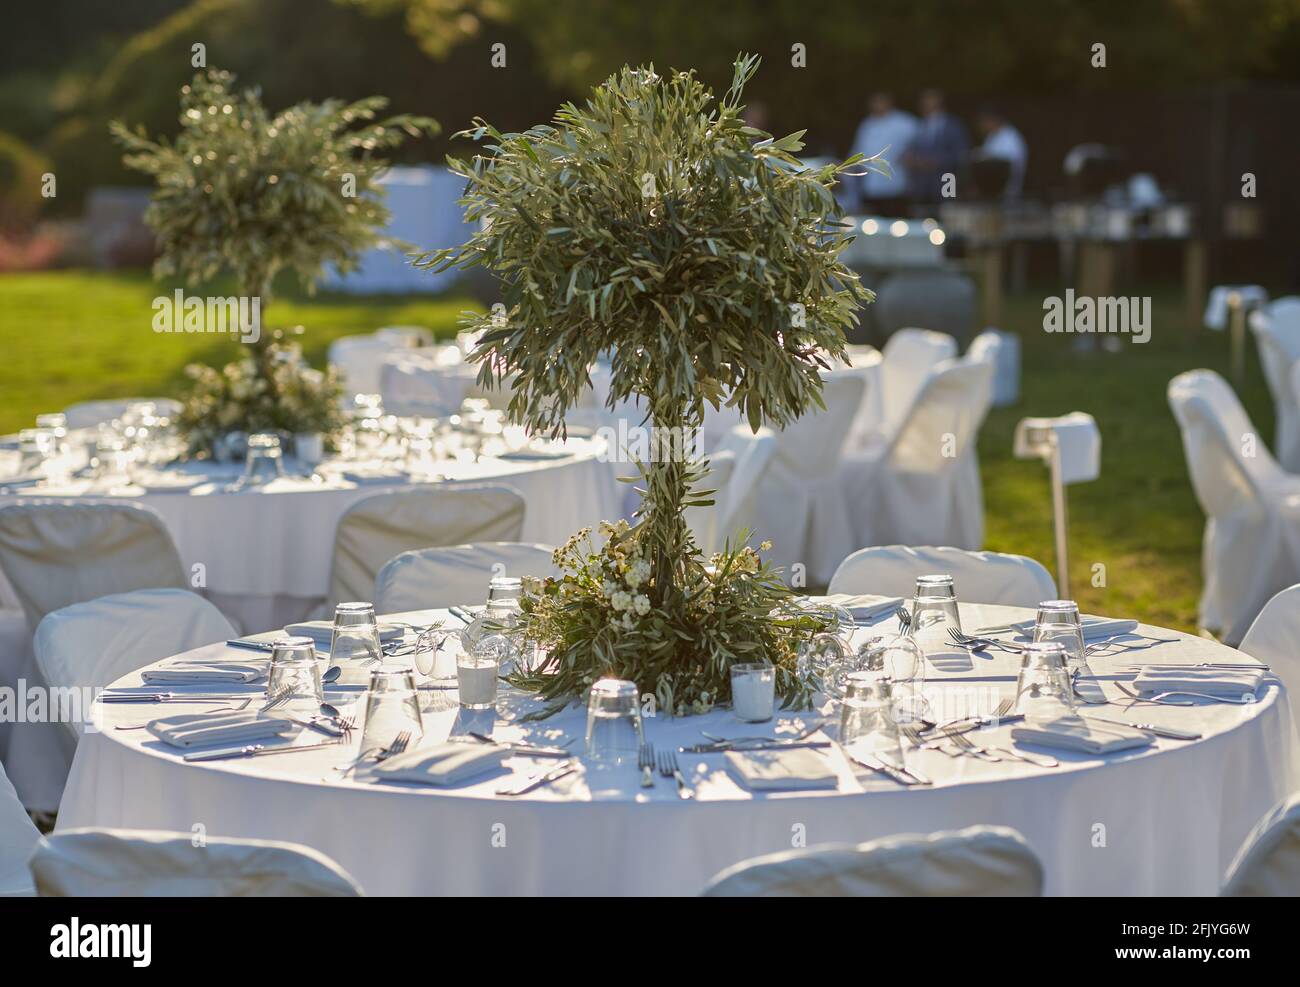 Wedding. Banquet. The chairs and round table for guests, served with cutlery, small olive tree and covered with a white tablecloth Stock Photo